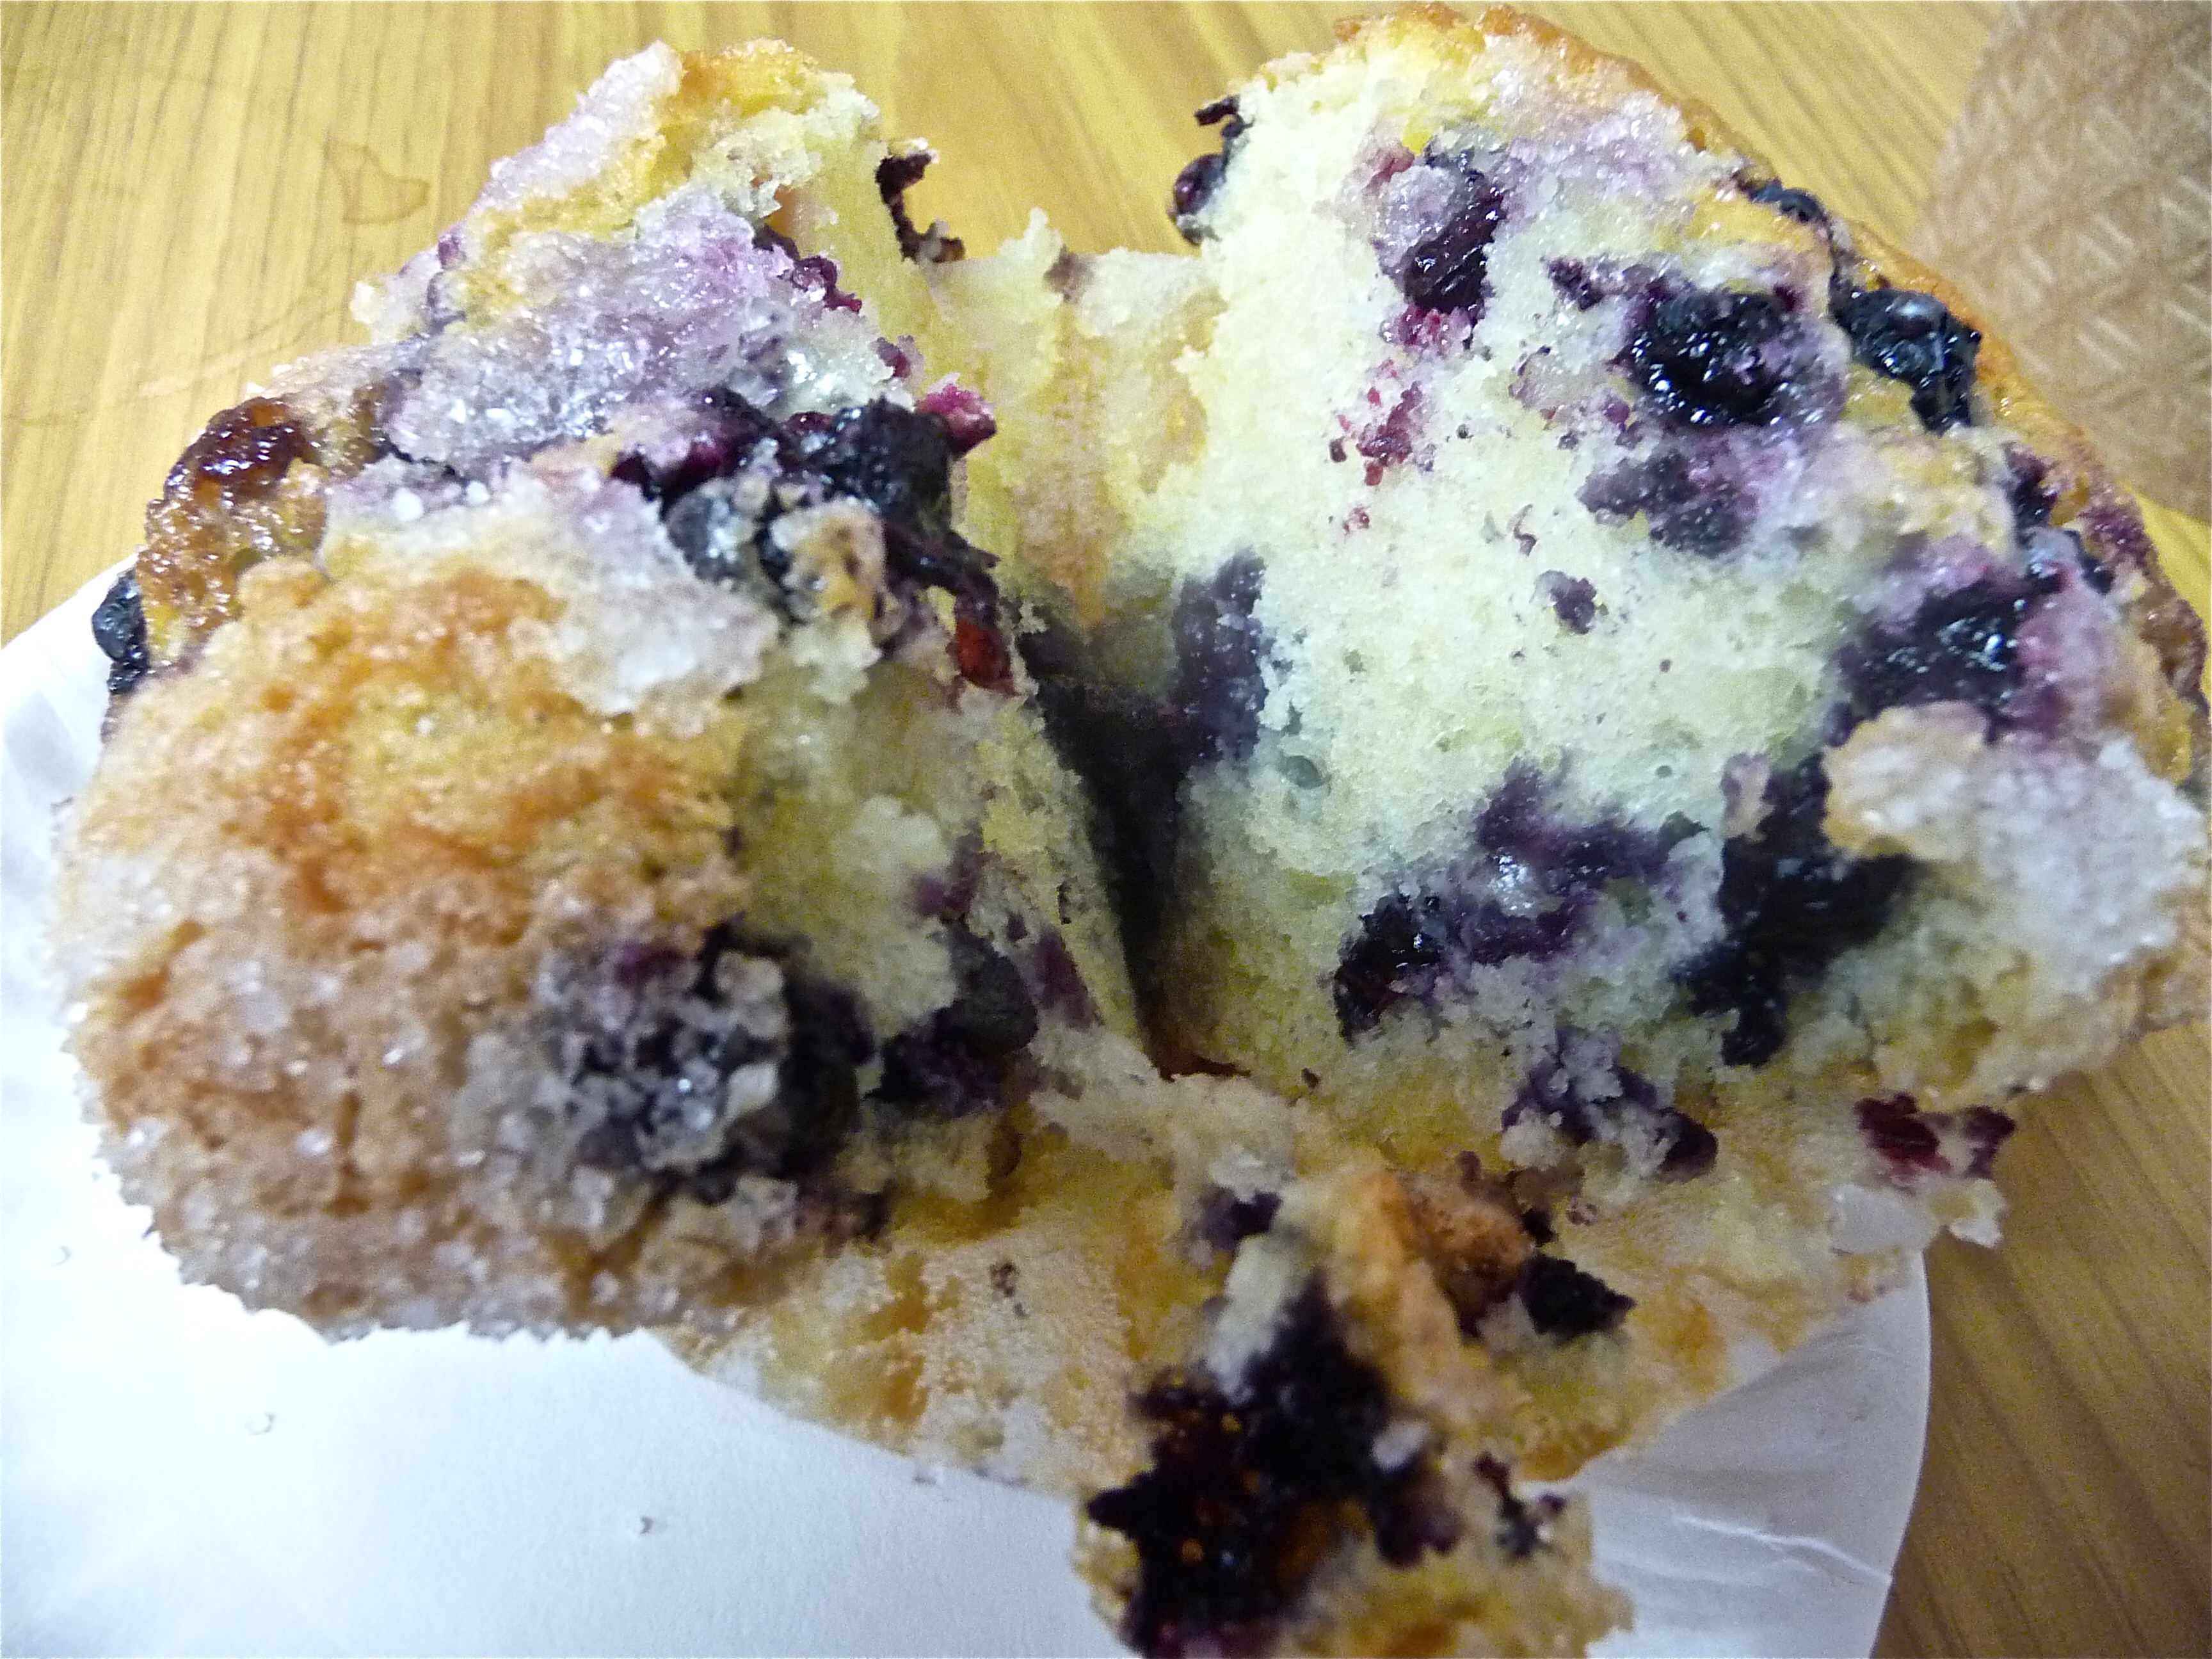 Blueberry muffin from the Muffin House in Medway MA